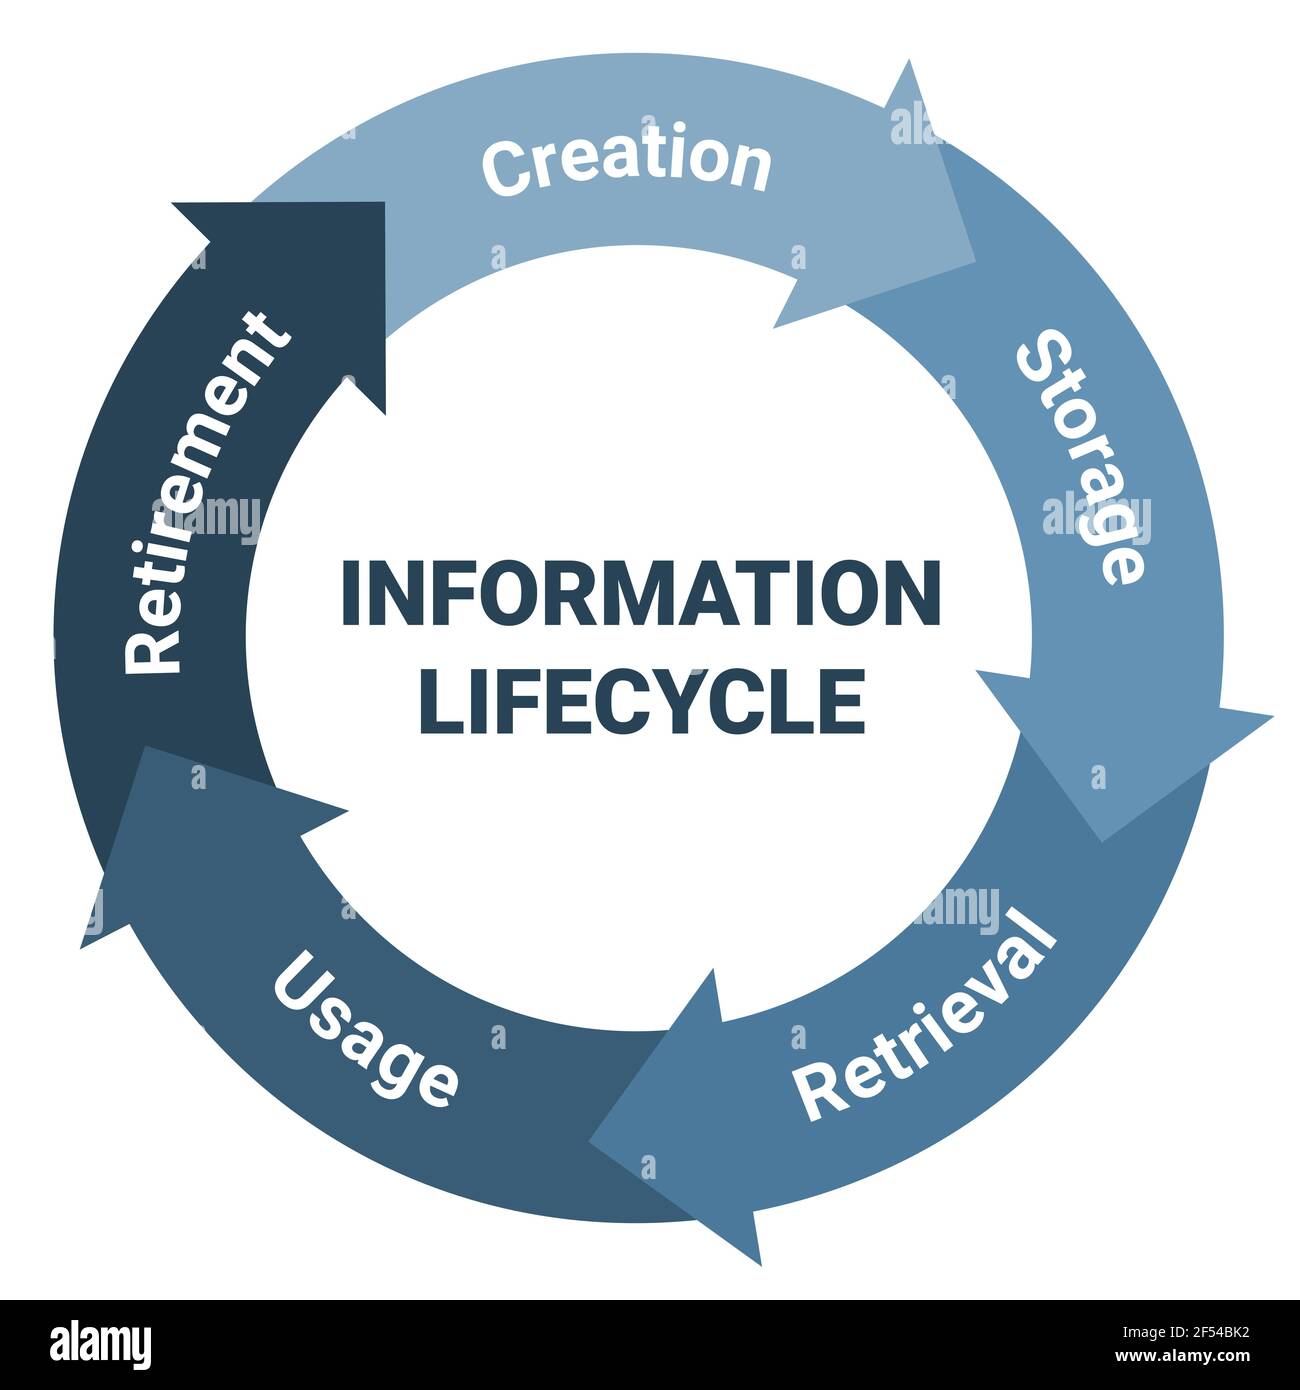 Information lifecycle management scheme. Methodology circle diagram with creation, storage, retrieval, usage and retirement. Blue on white background Stock Vector